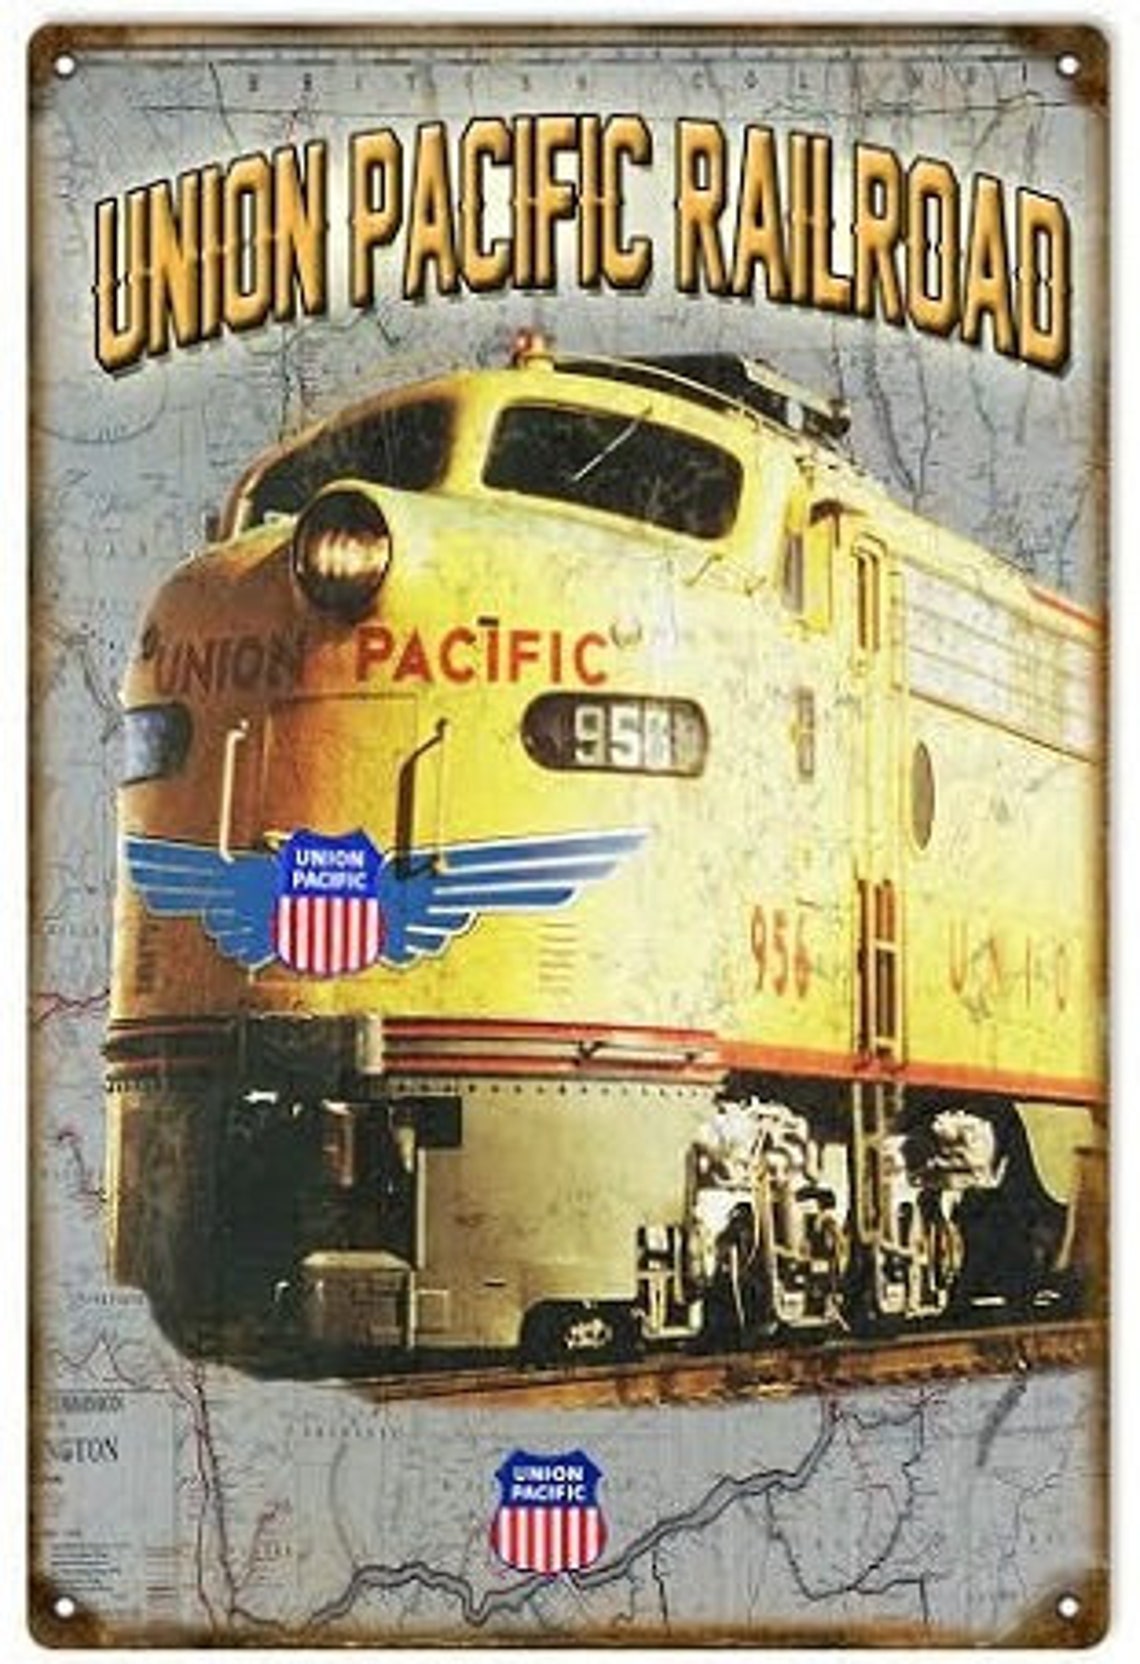 Union Pacific Railroad 12 X 18 Metal Sign | Etsy